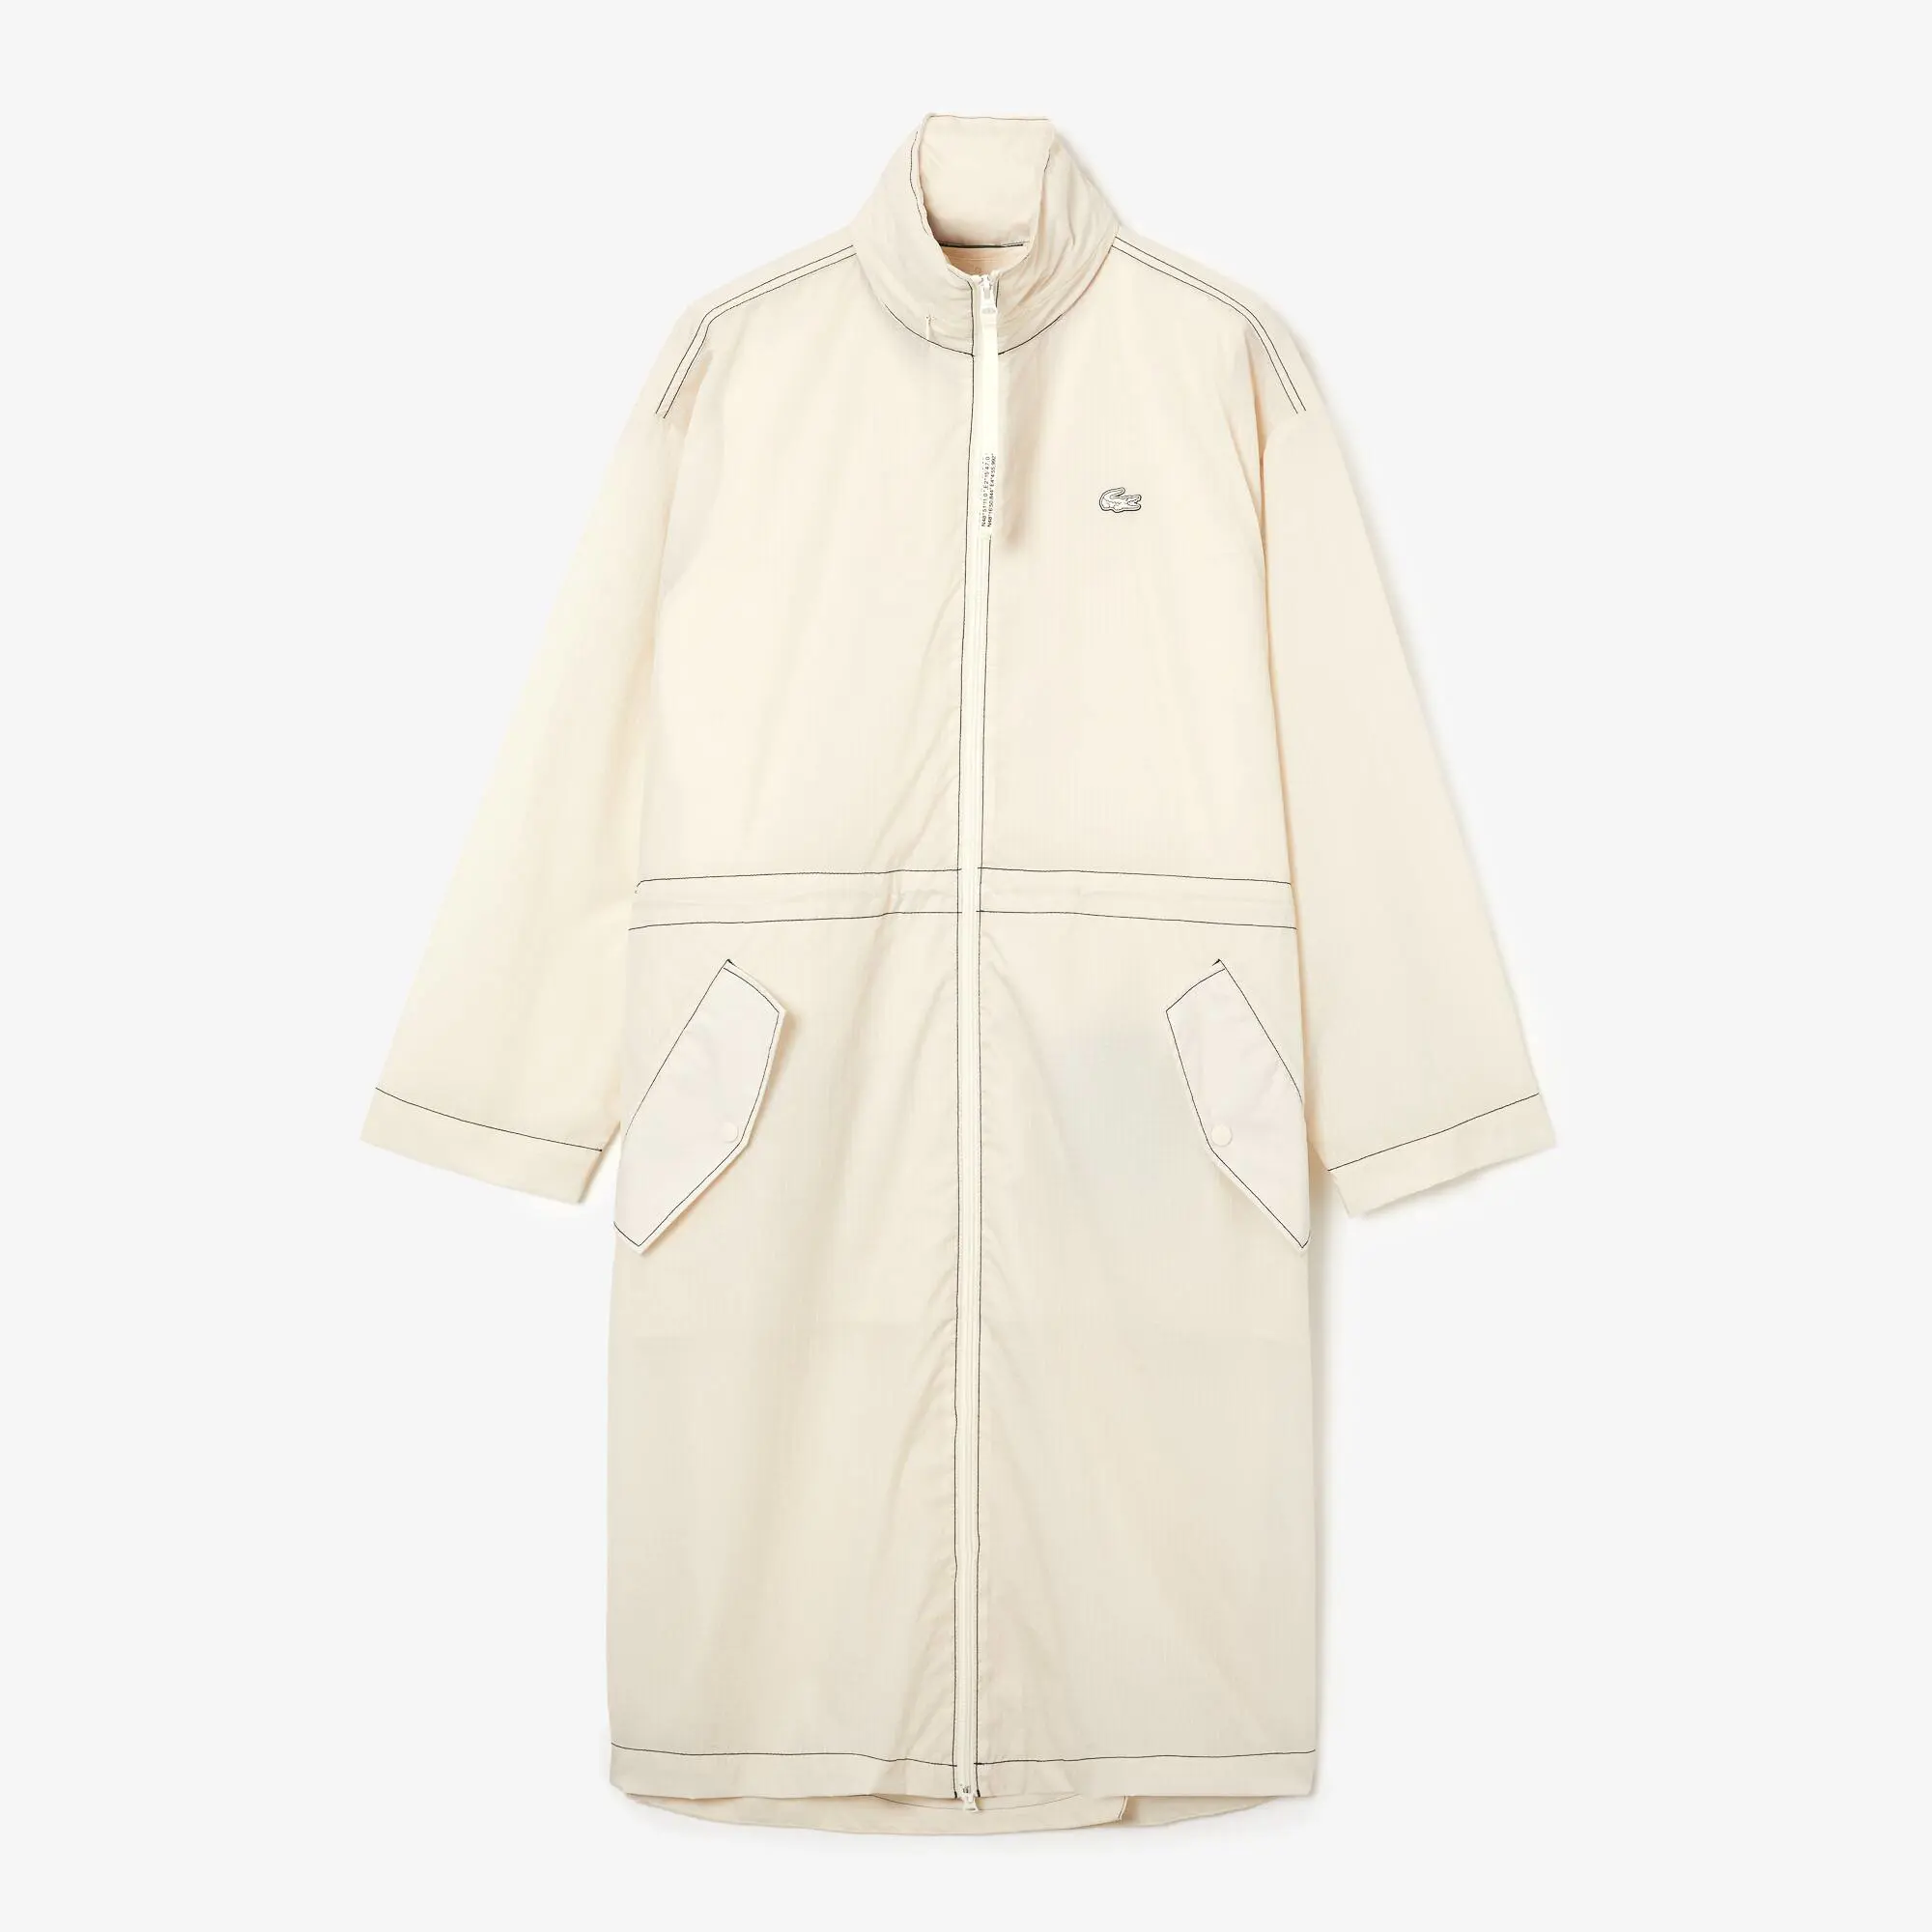 Lacoste Women’s 2-in-1 Water-Repellent Hooded Parka. 2